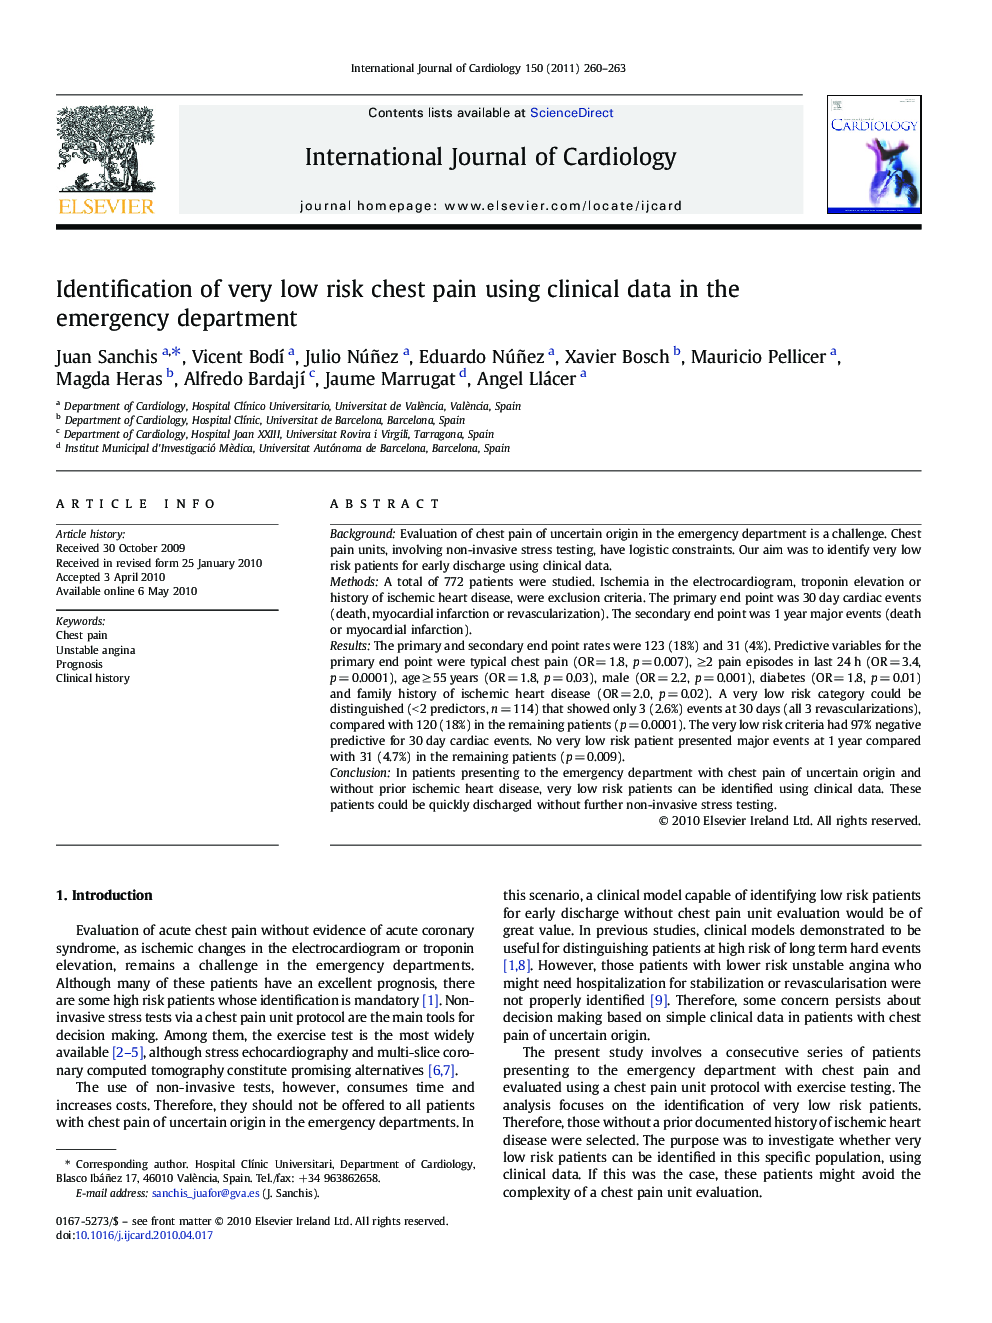 Identification of very low risk chest pain using clinical data in the emergency department